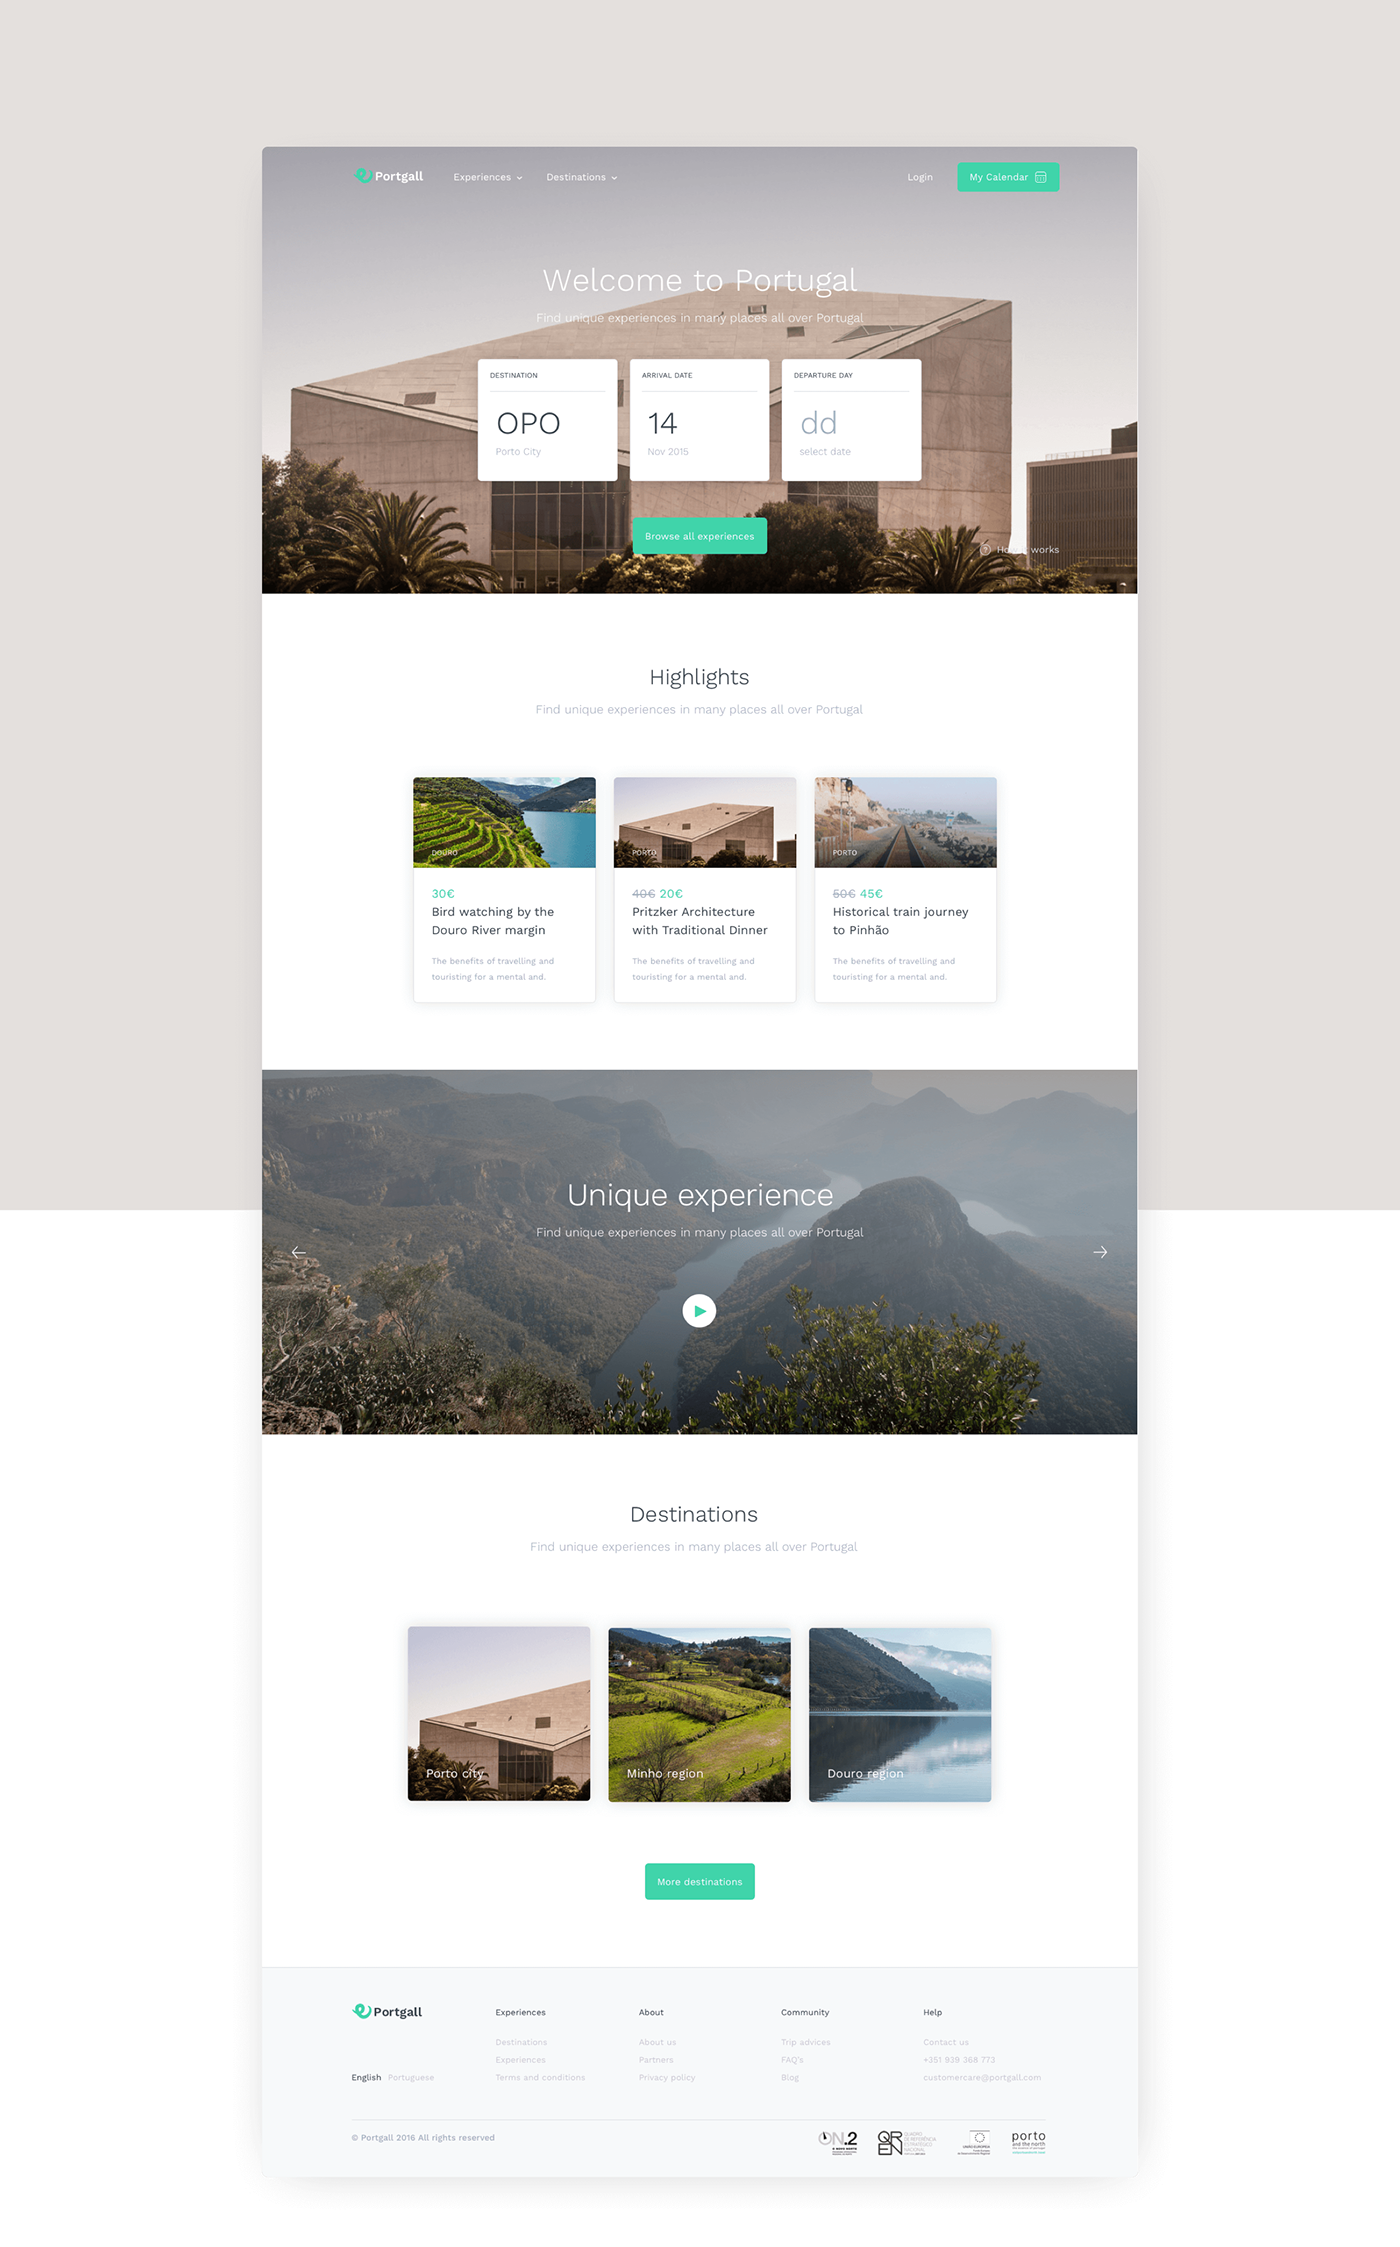 tourism Experiences Portugal Travel checkout calendar filter search landing page user flow wireframe iconography icons green Significa